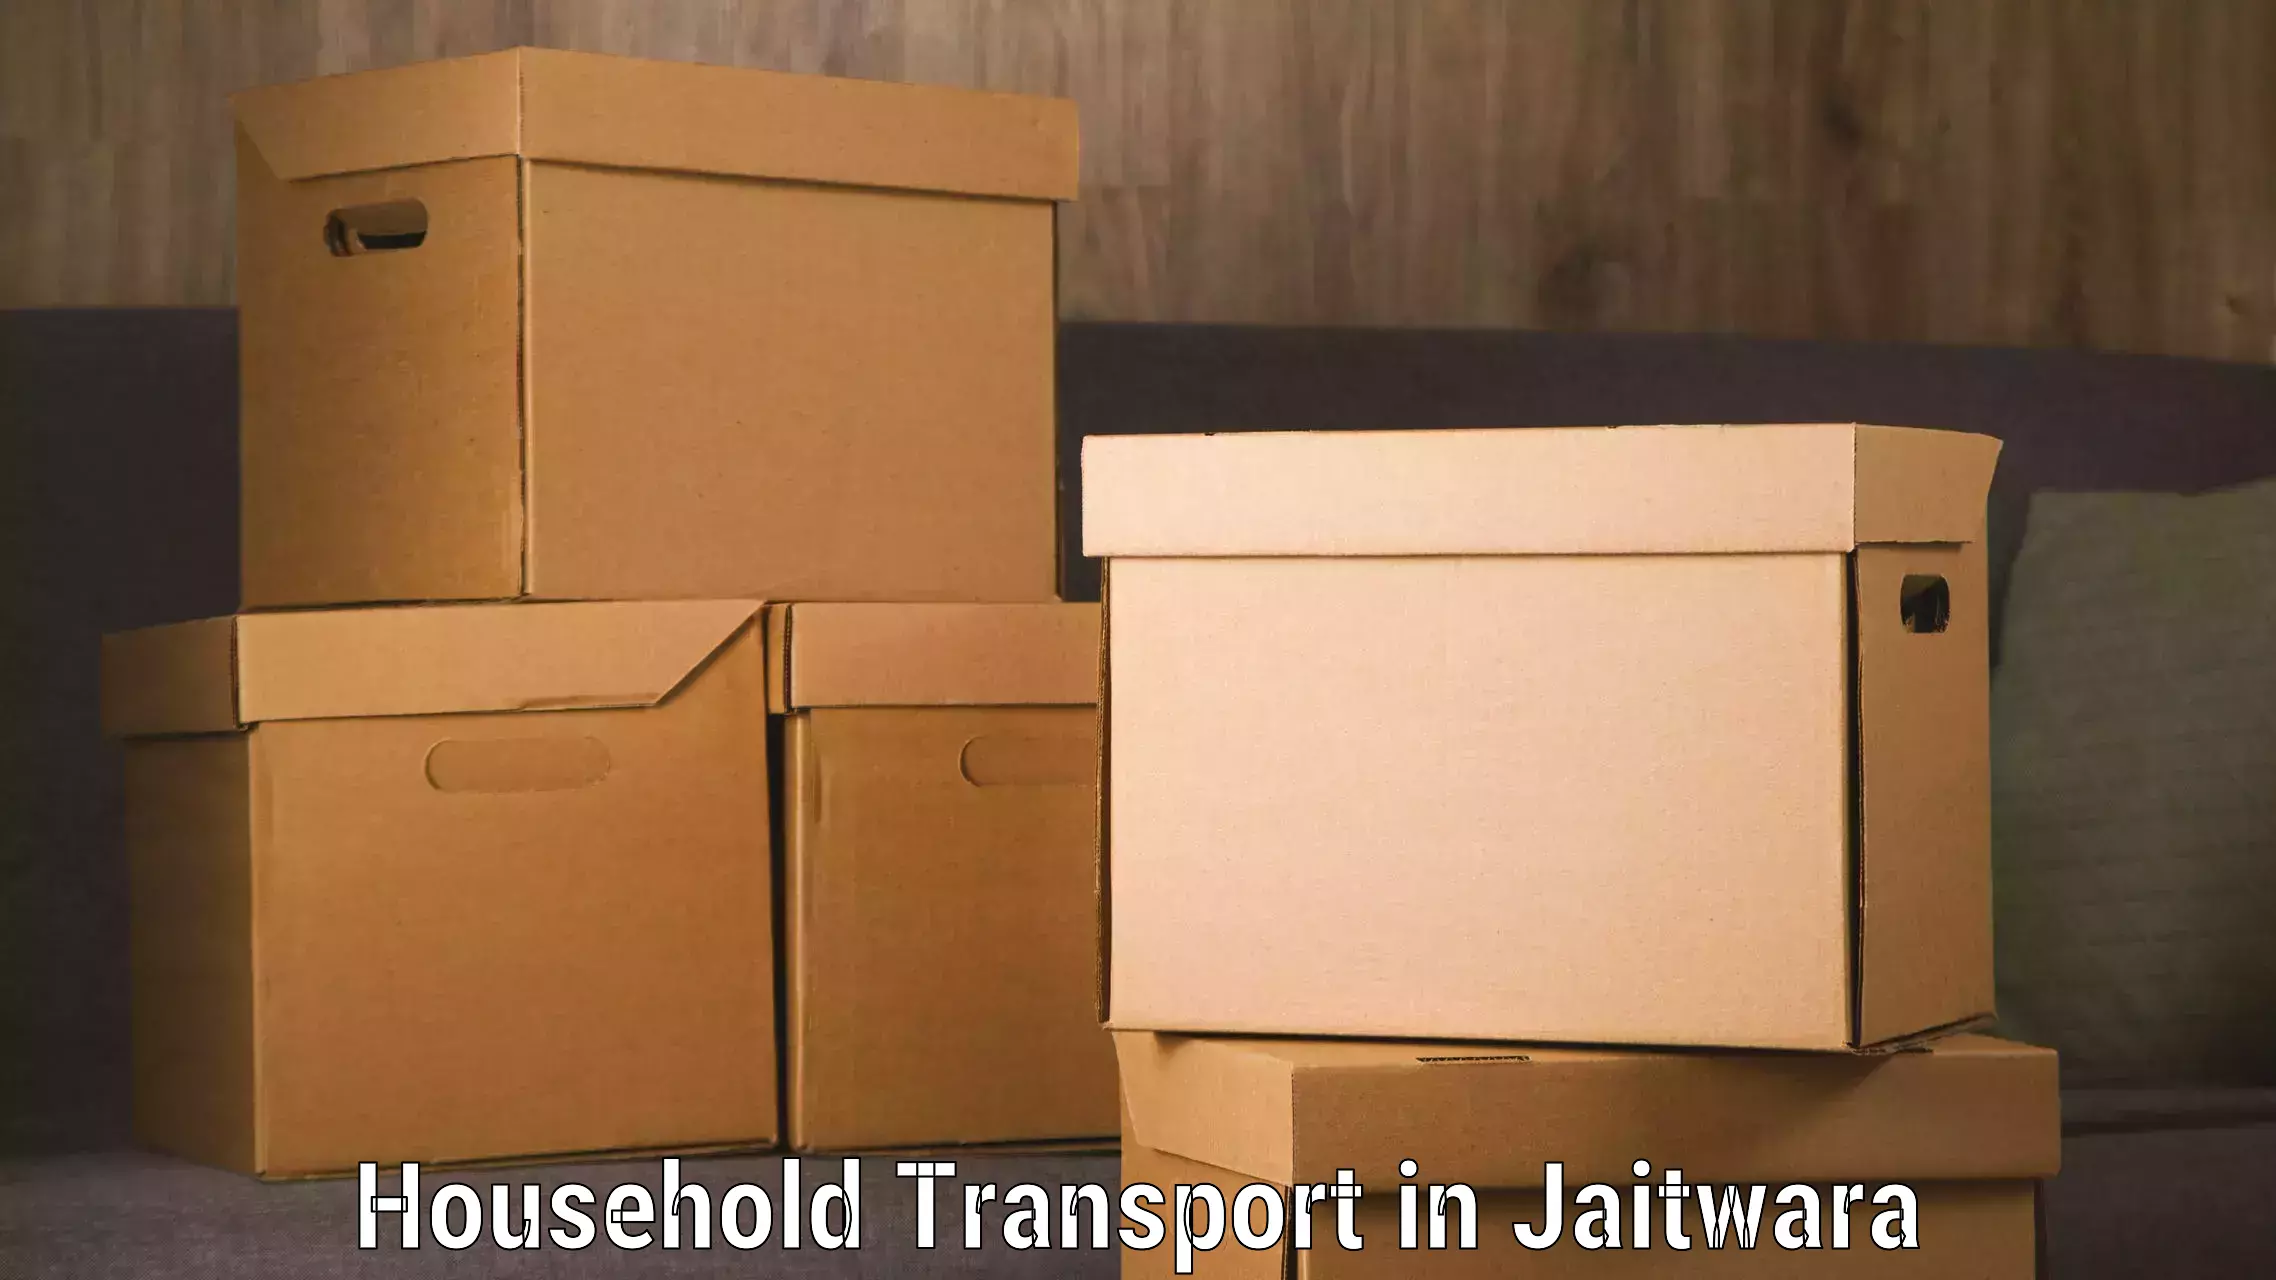 Quality household movers in Jaitwara